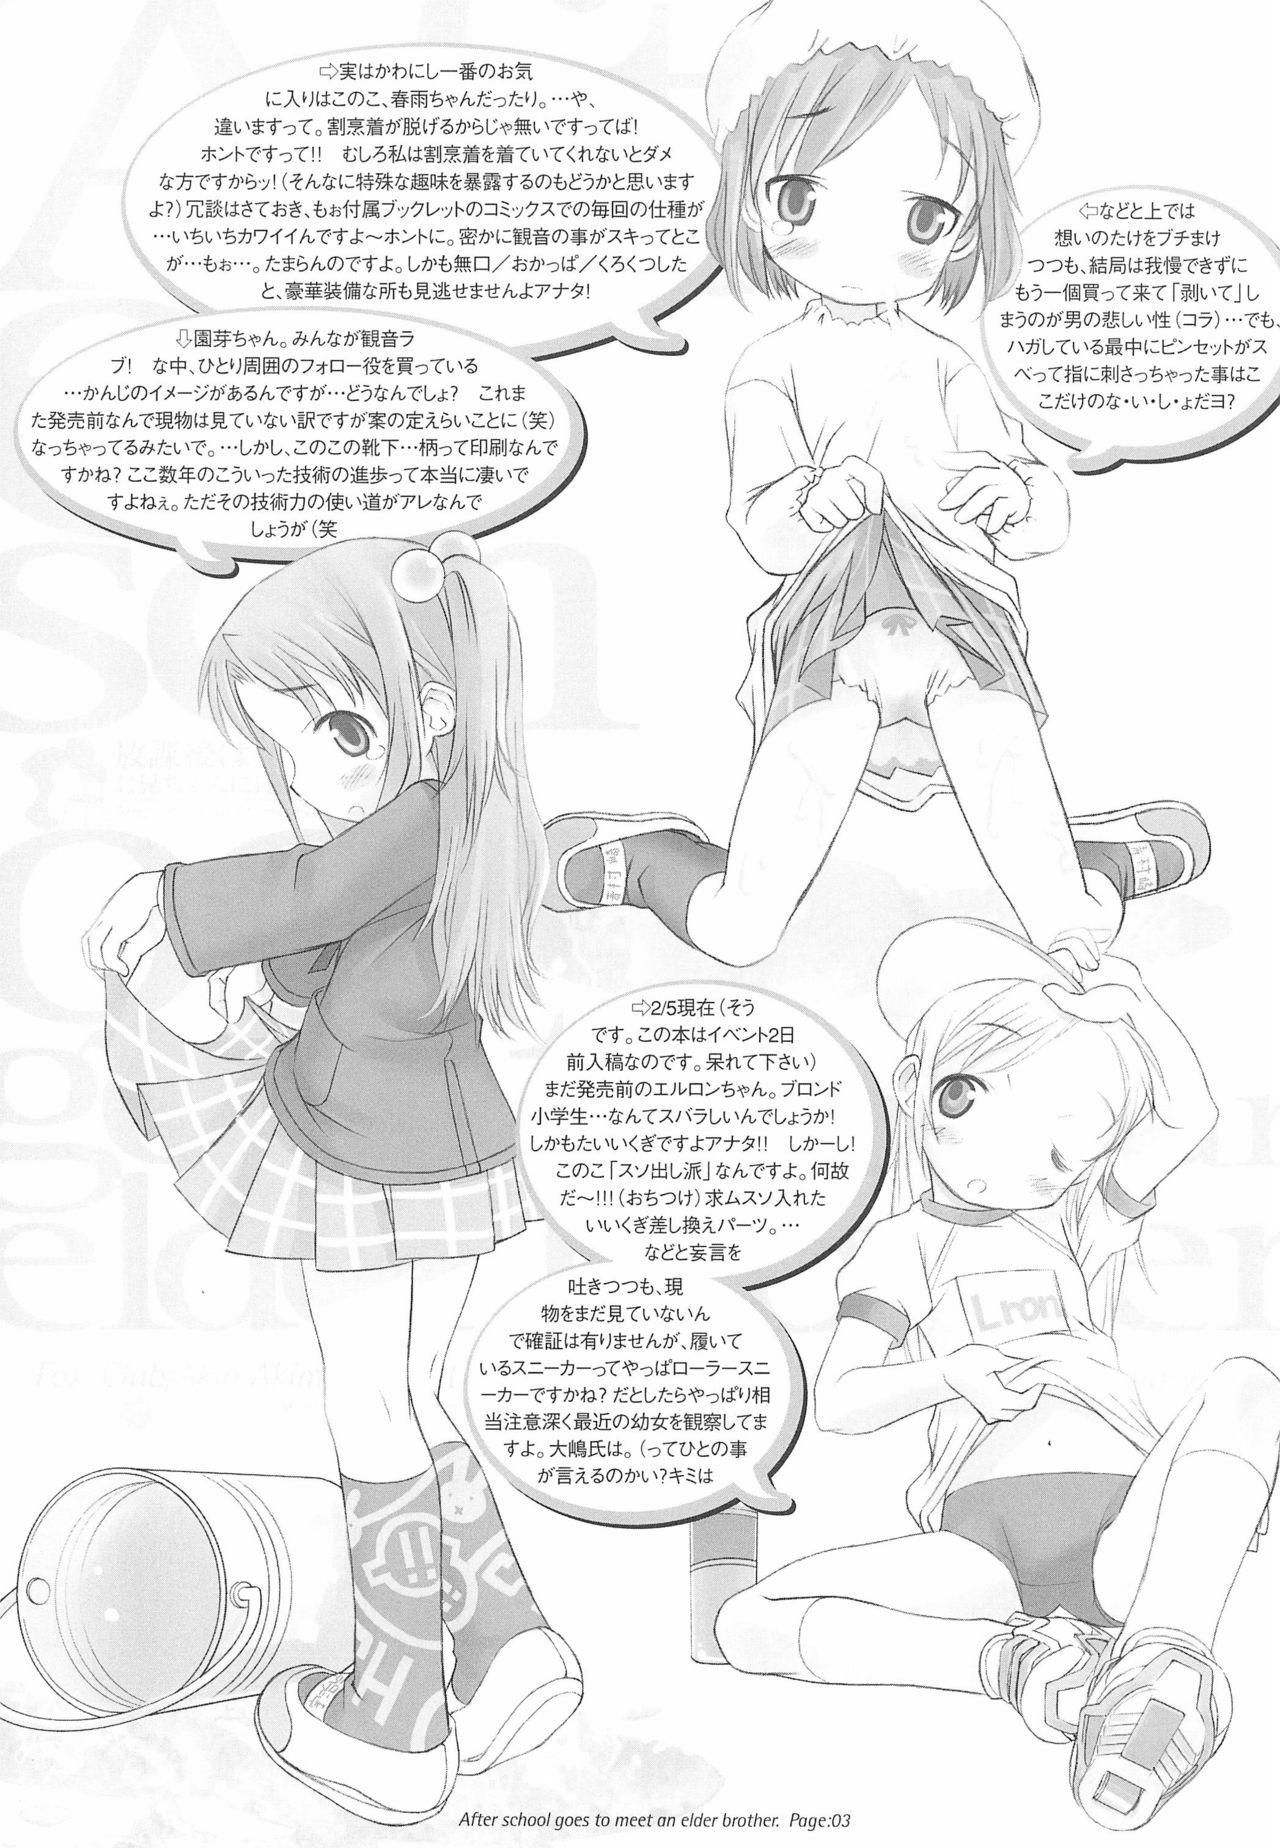 Girl After School Goes To Meet An Elder Brother - Shuukan watashi no onii-chan | weekly dearest my brother Alt - Page 3